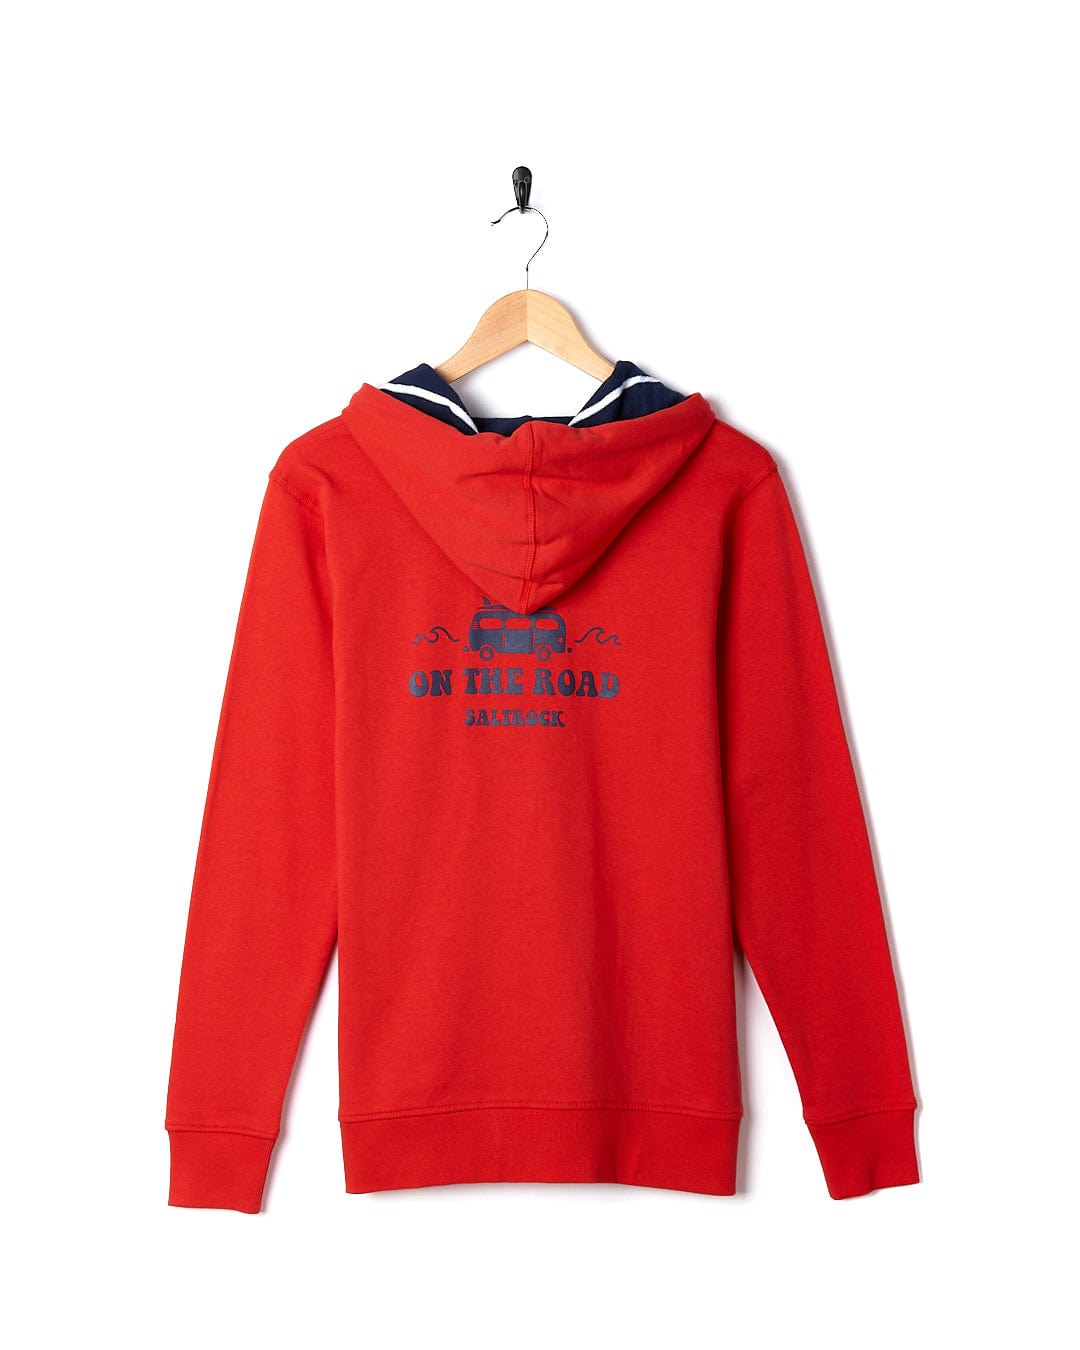 A Saltrock - Womens Zip Hoodie - Red with the word sailor on it.